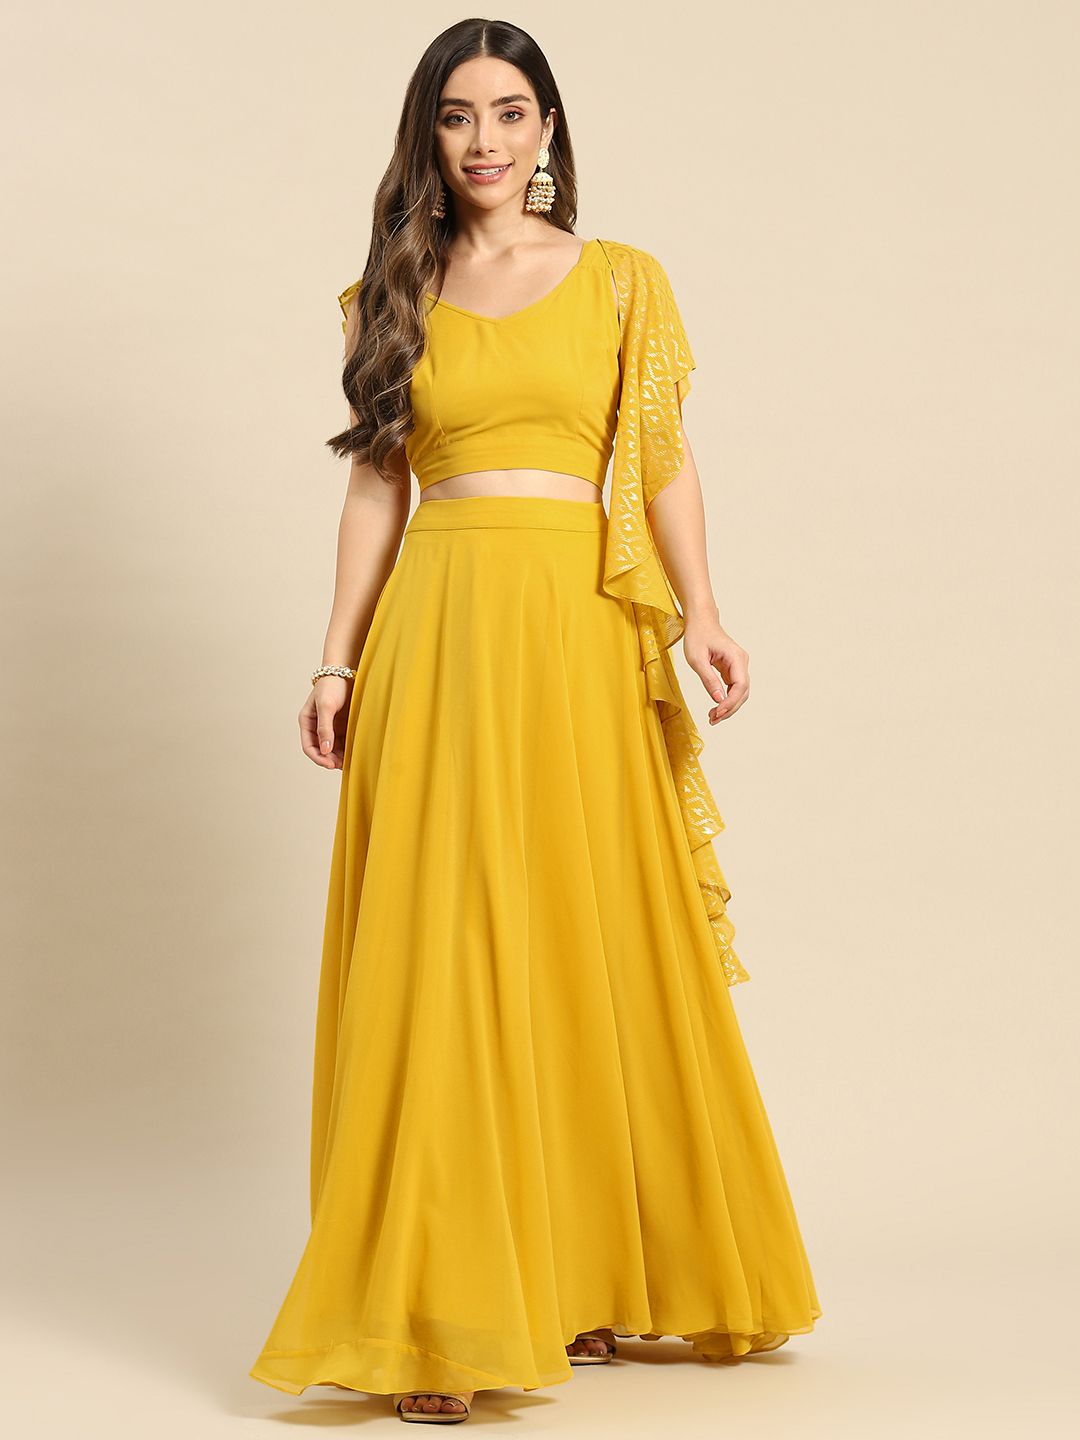 MABISH by Sonal Jain Yellow Ready to Wear Lehenga & Blouse With Dupatta Price in India